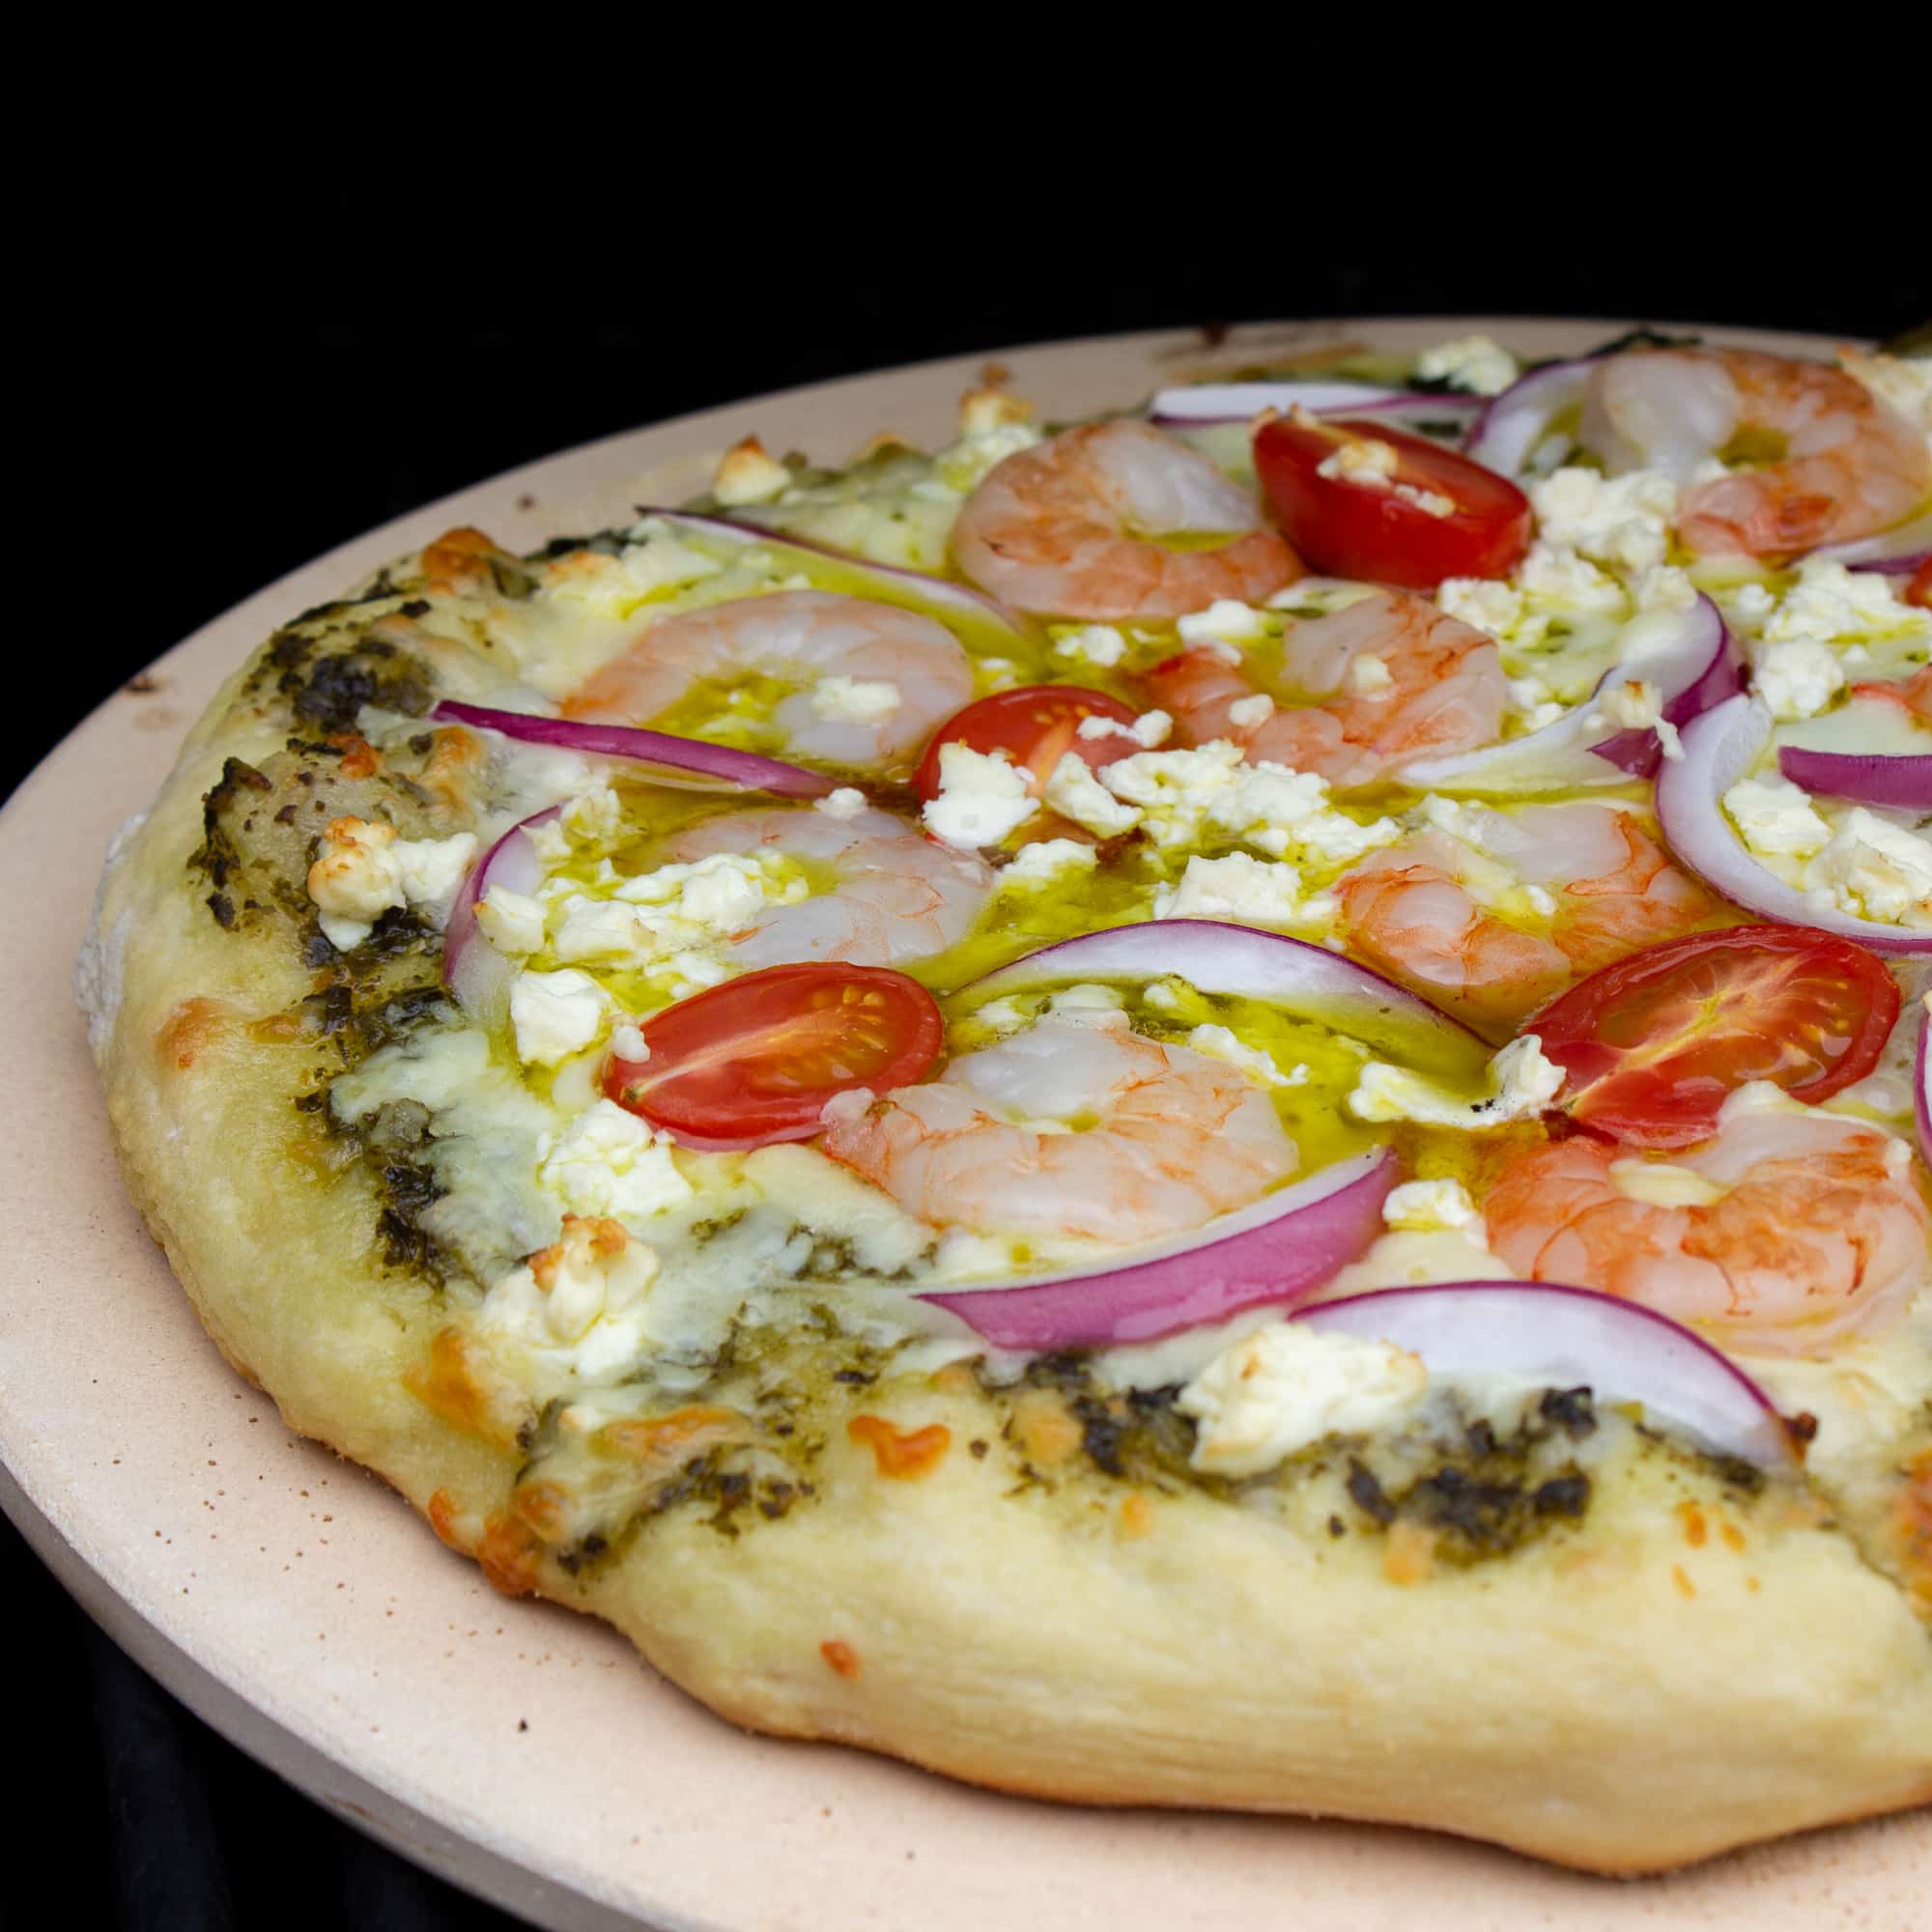 How to cook a pizza on a grill with this great BBQ pizza recipe, made with shrimp, pesto, red onions, grape tomatoes, feta cheese and mozzarella.